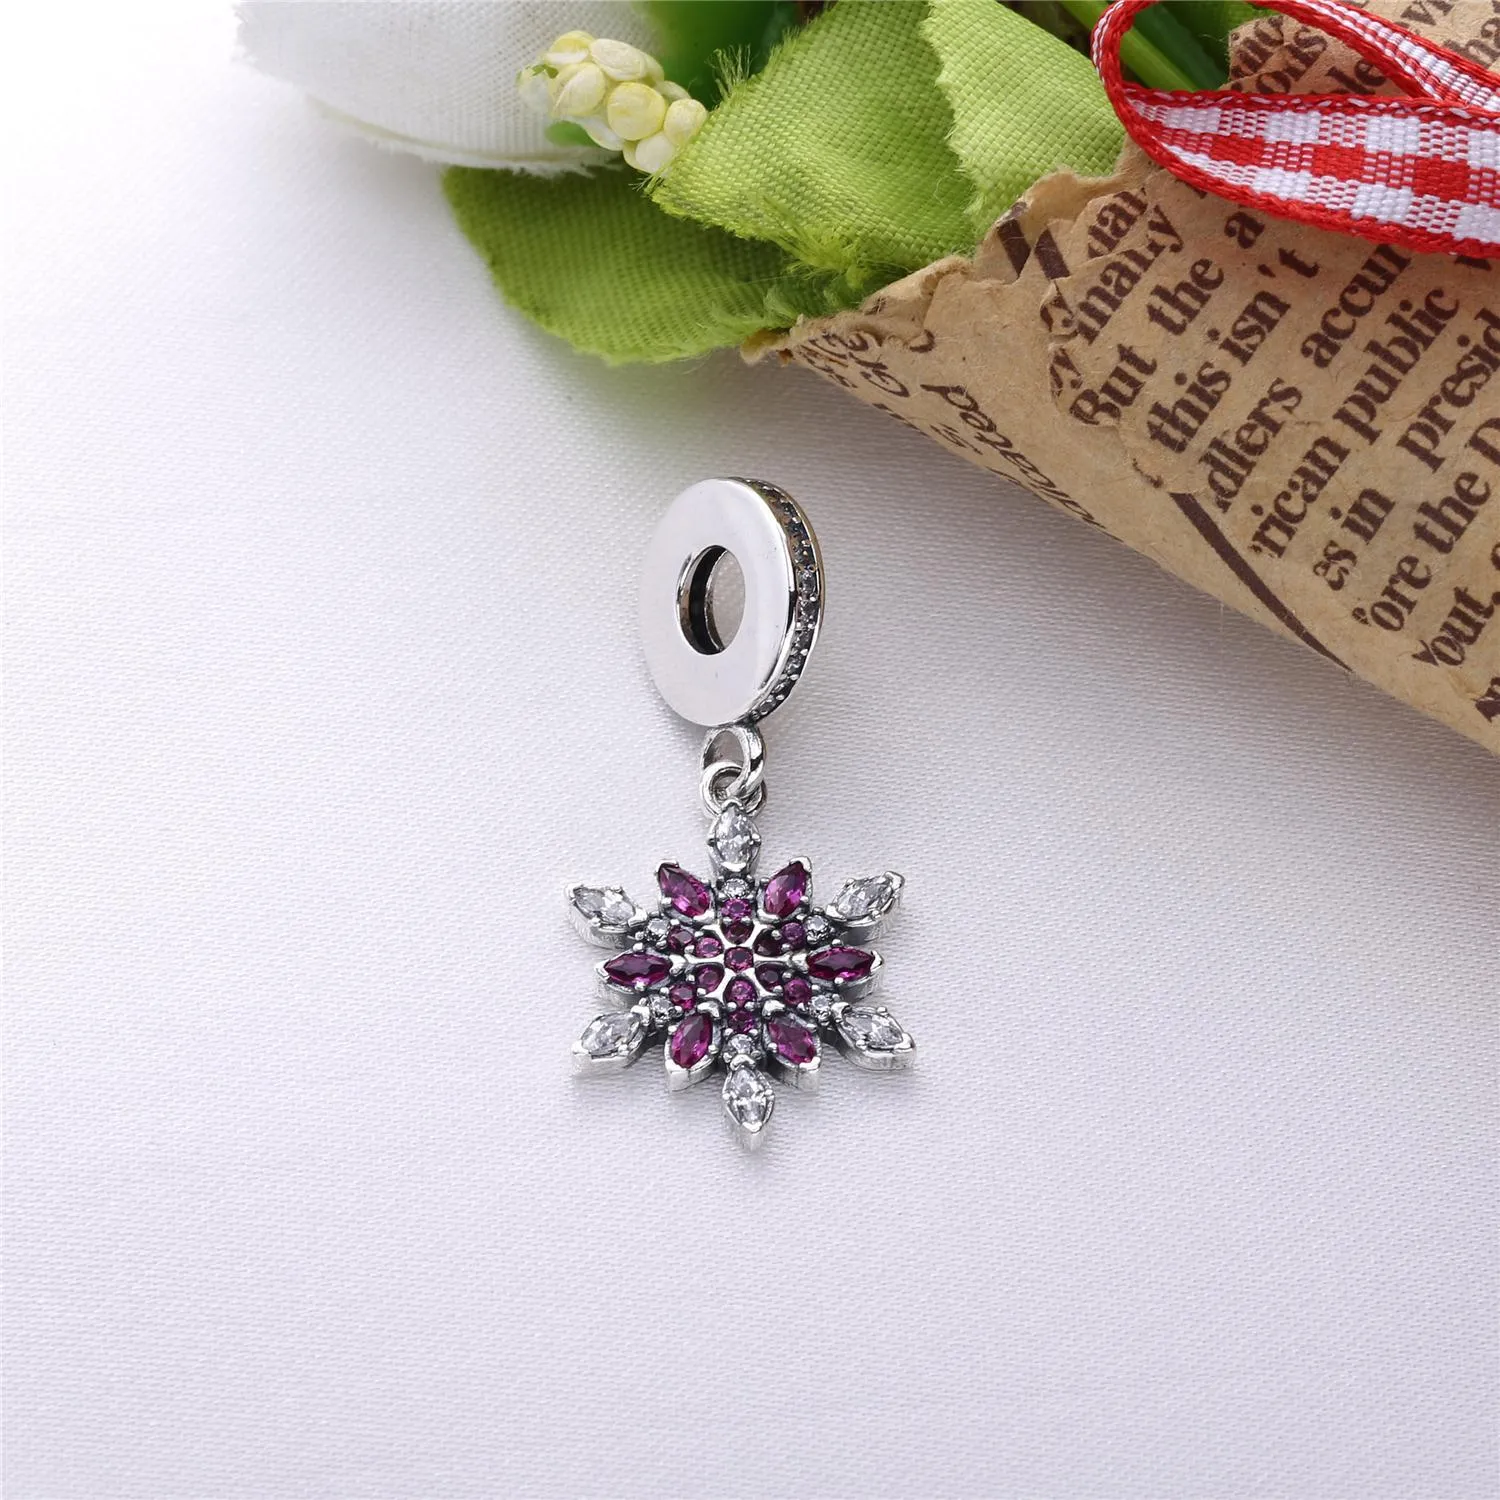 Snowflake silver dangle with clear cubic zirconia 791761nblmx